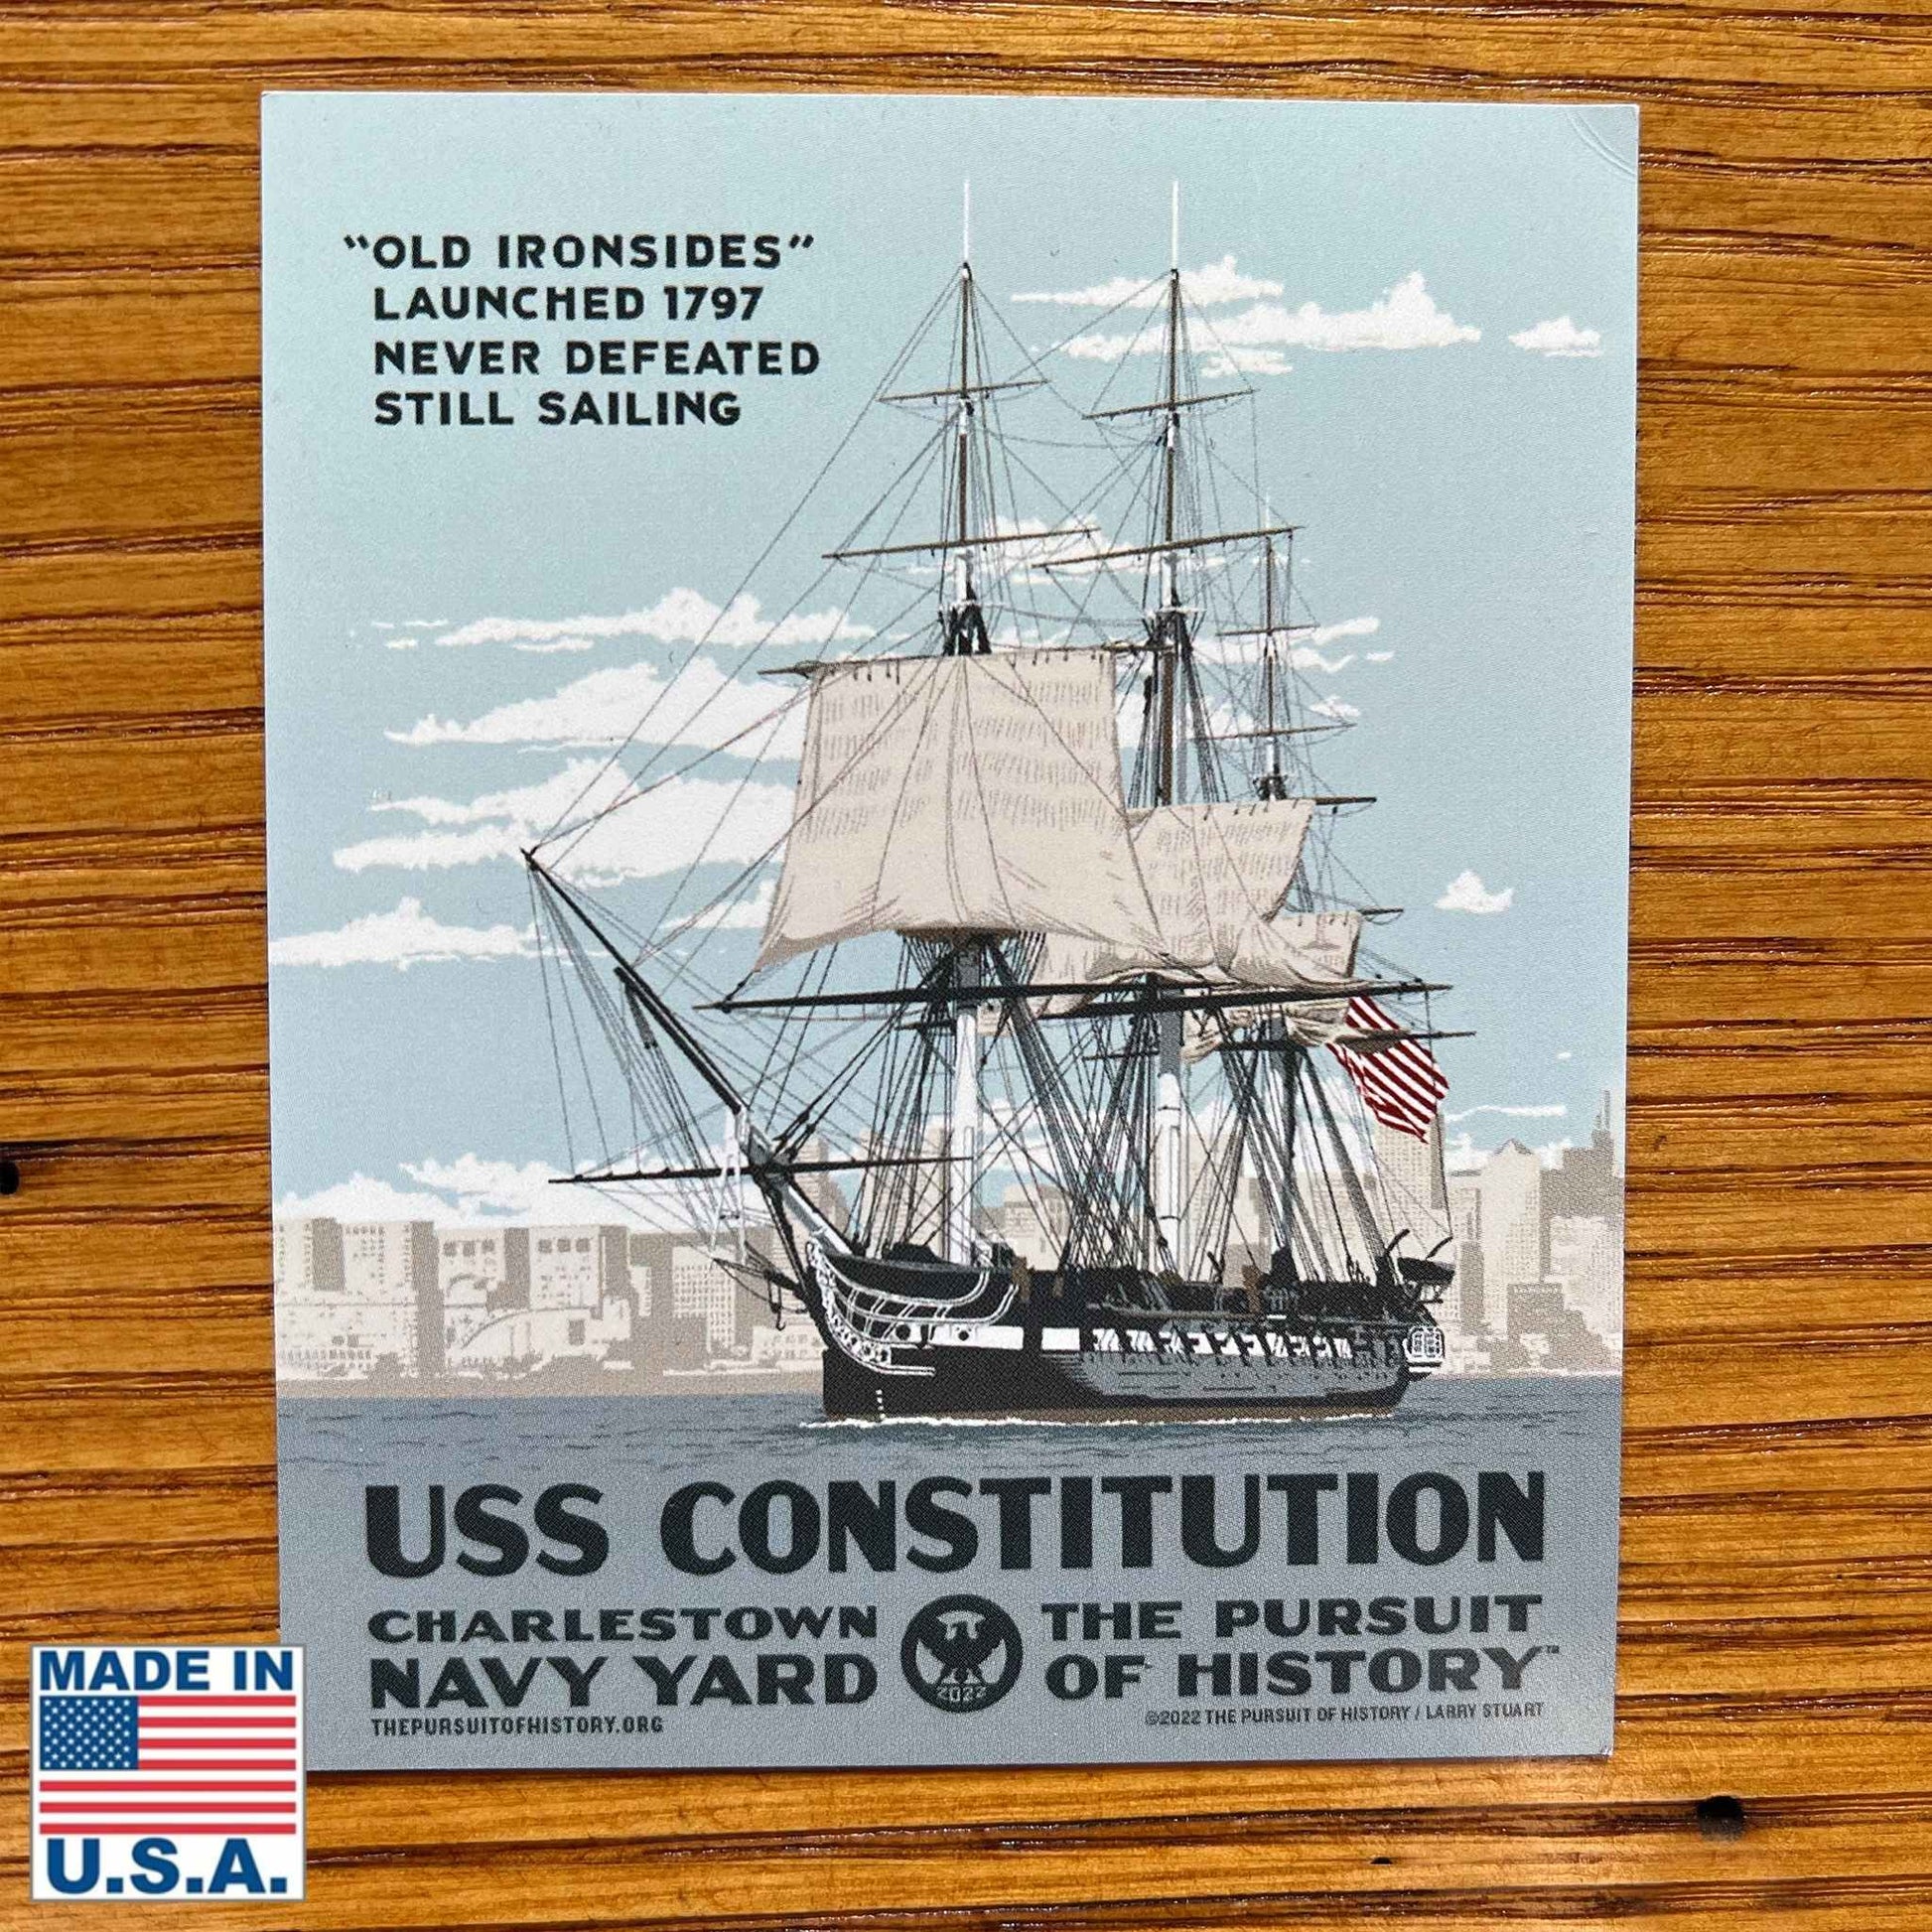 USS Constitution Cards - Sold in a pack of 10 from The History List store